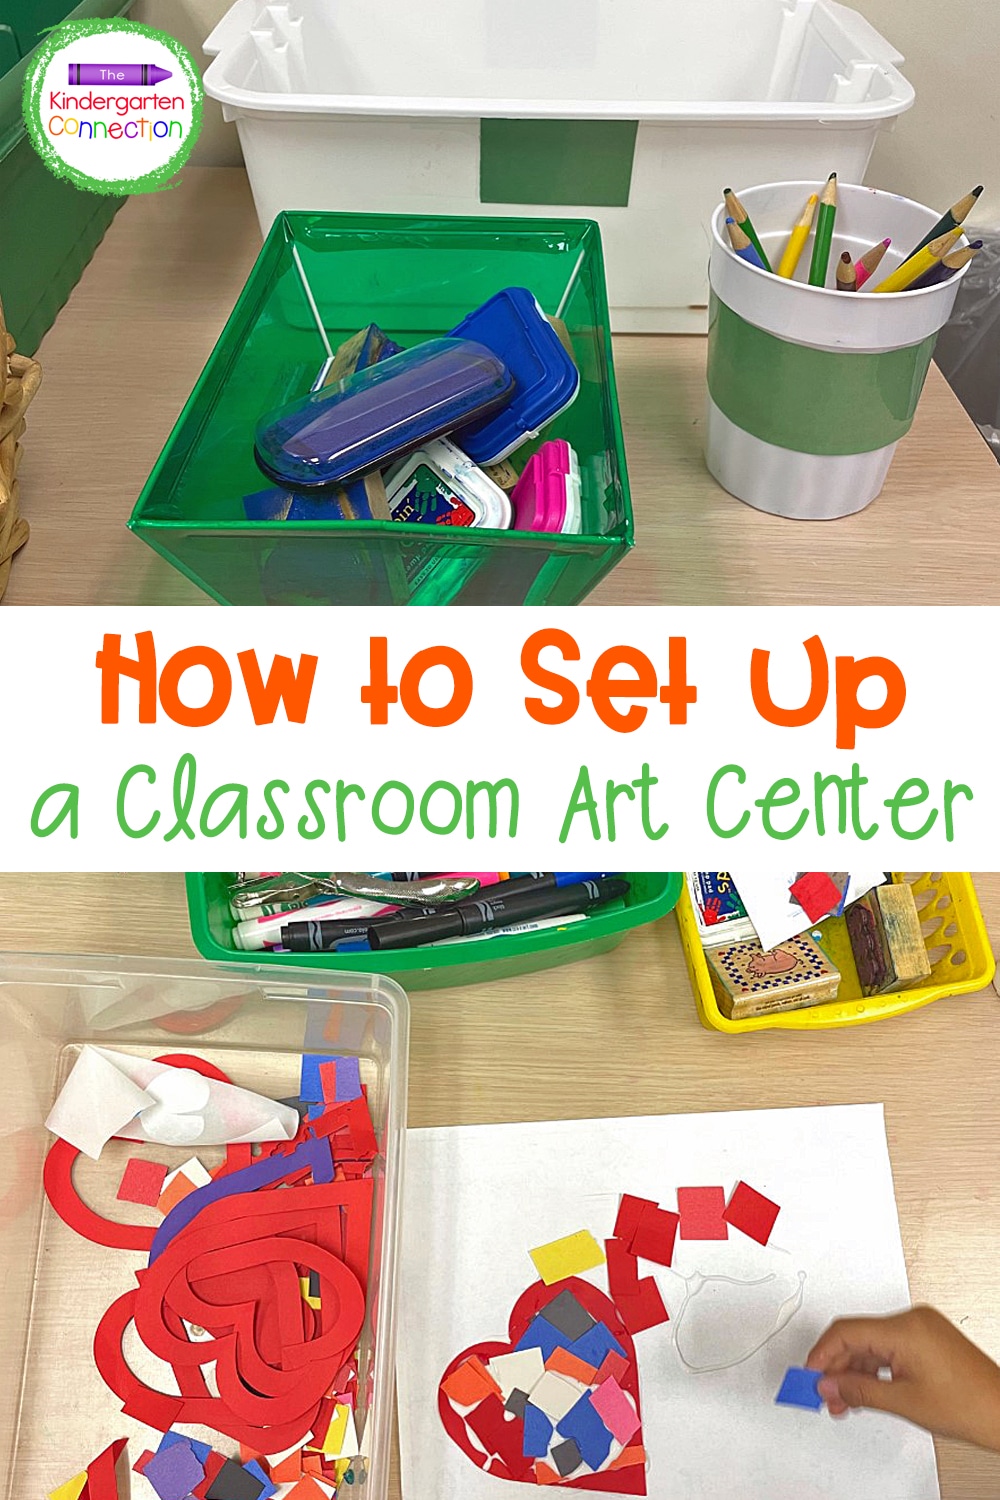 Follow these simple steps for setting up an independent classroom art center and your kids will be making beautiful creations in no time!